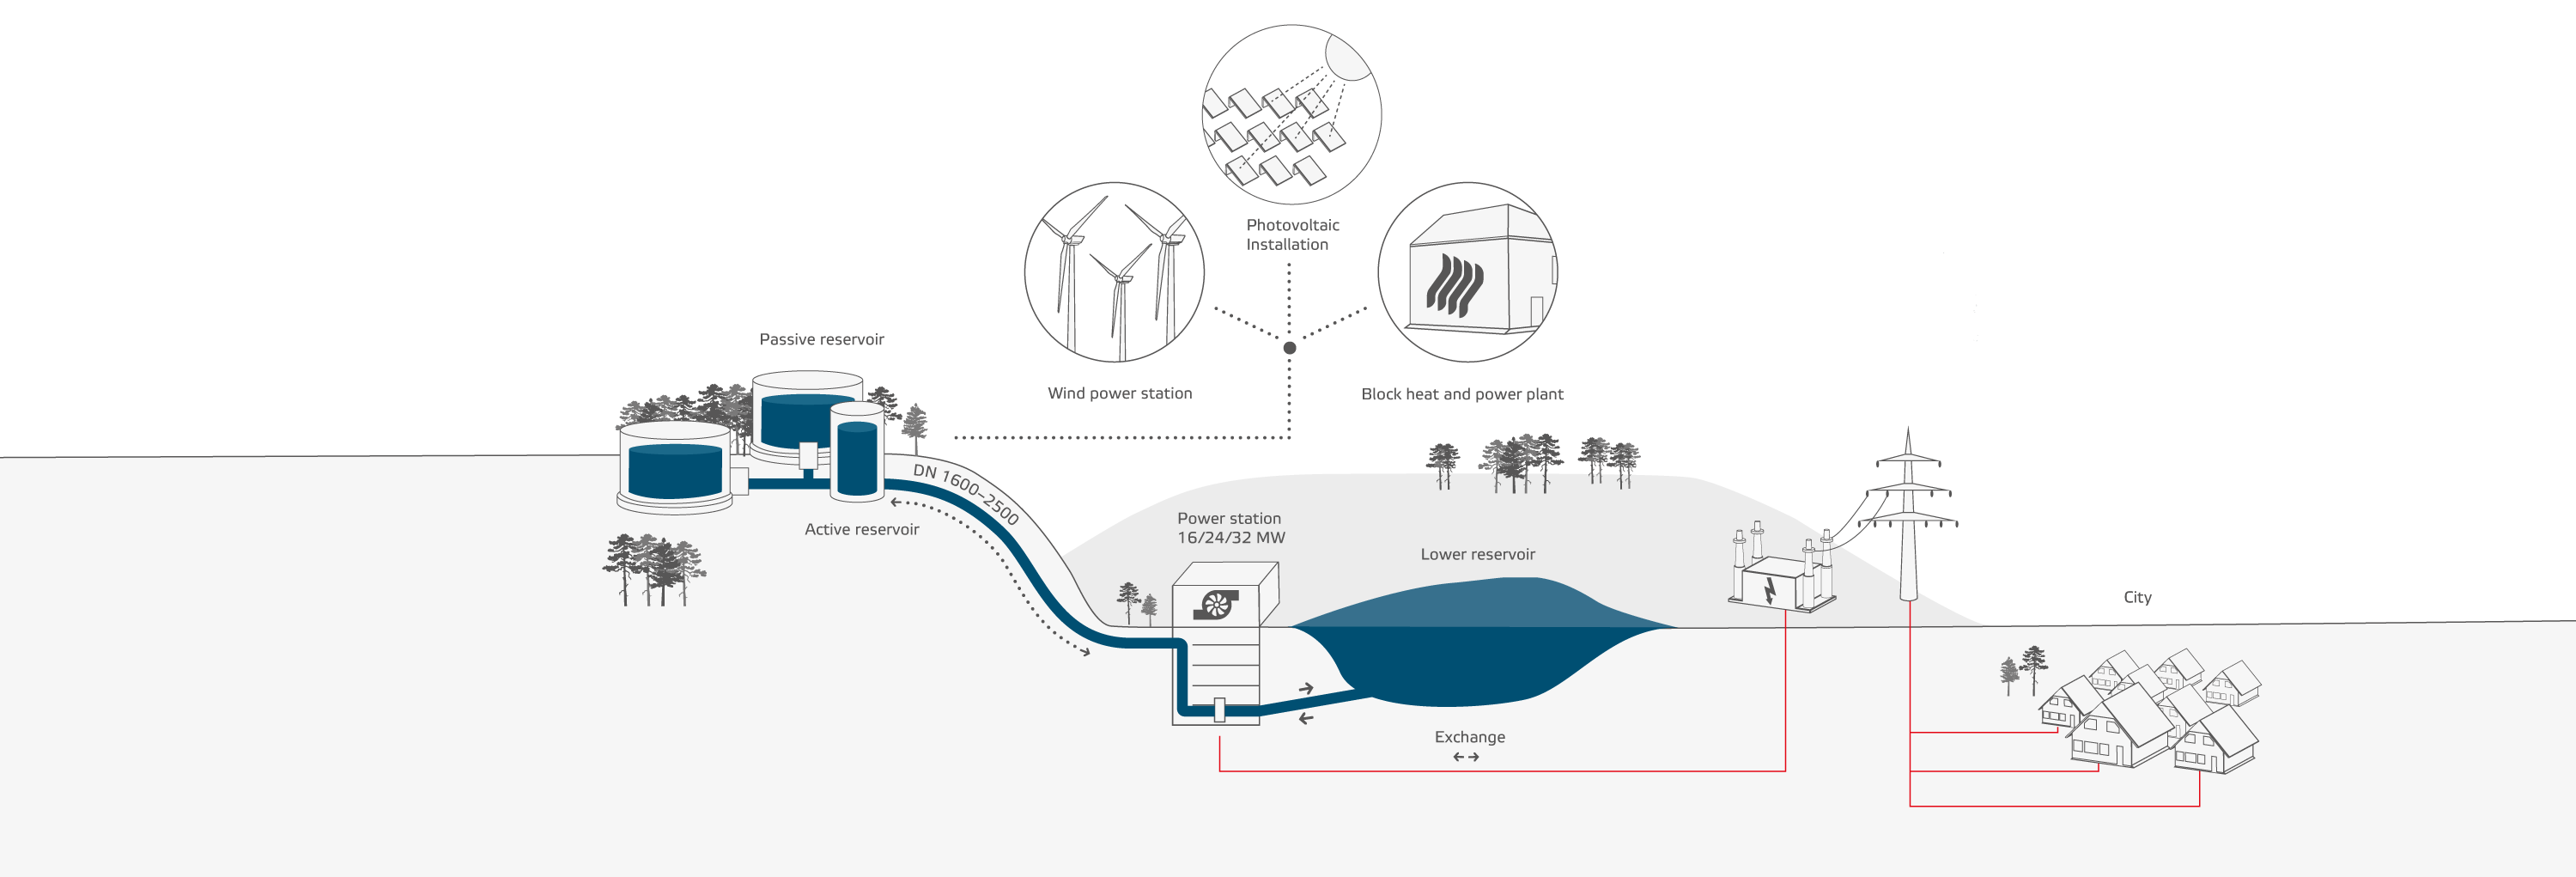 Water Battery concept - Max Bögl Wind AG